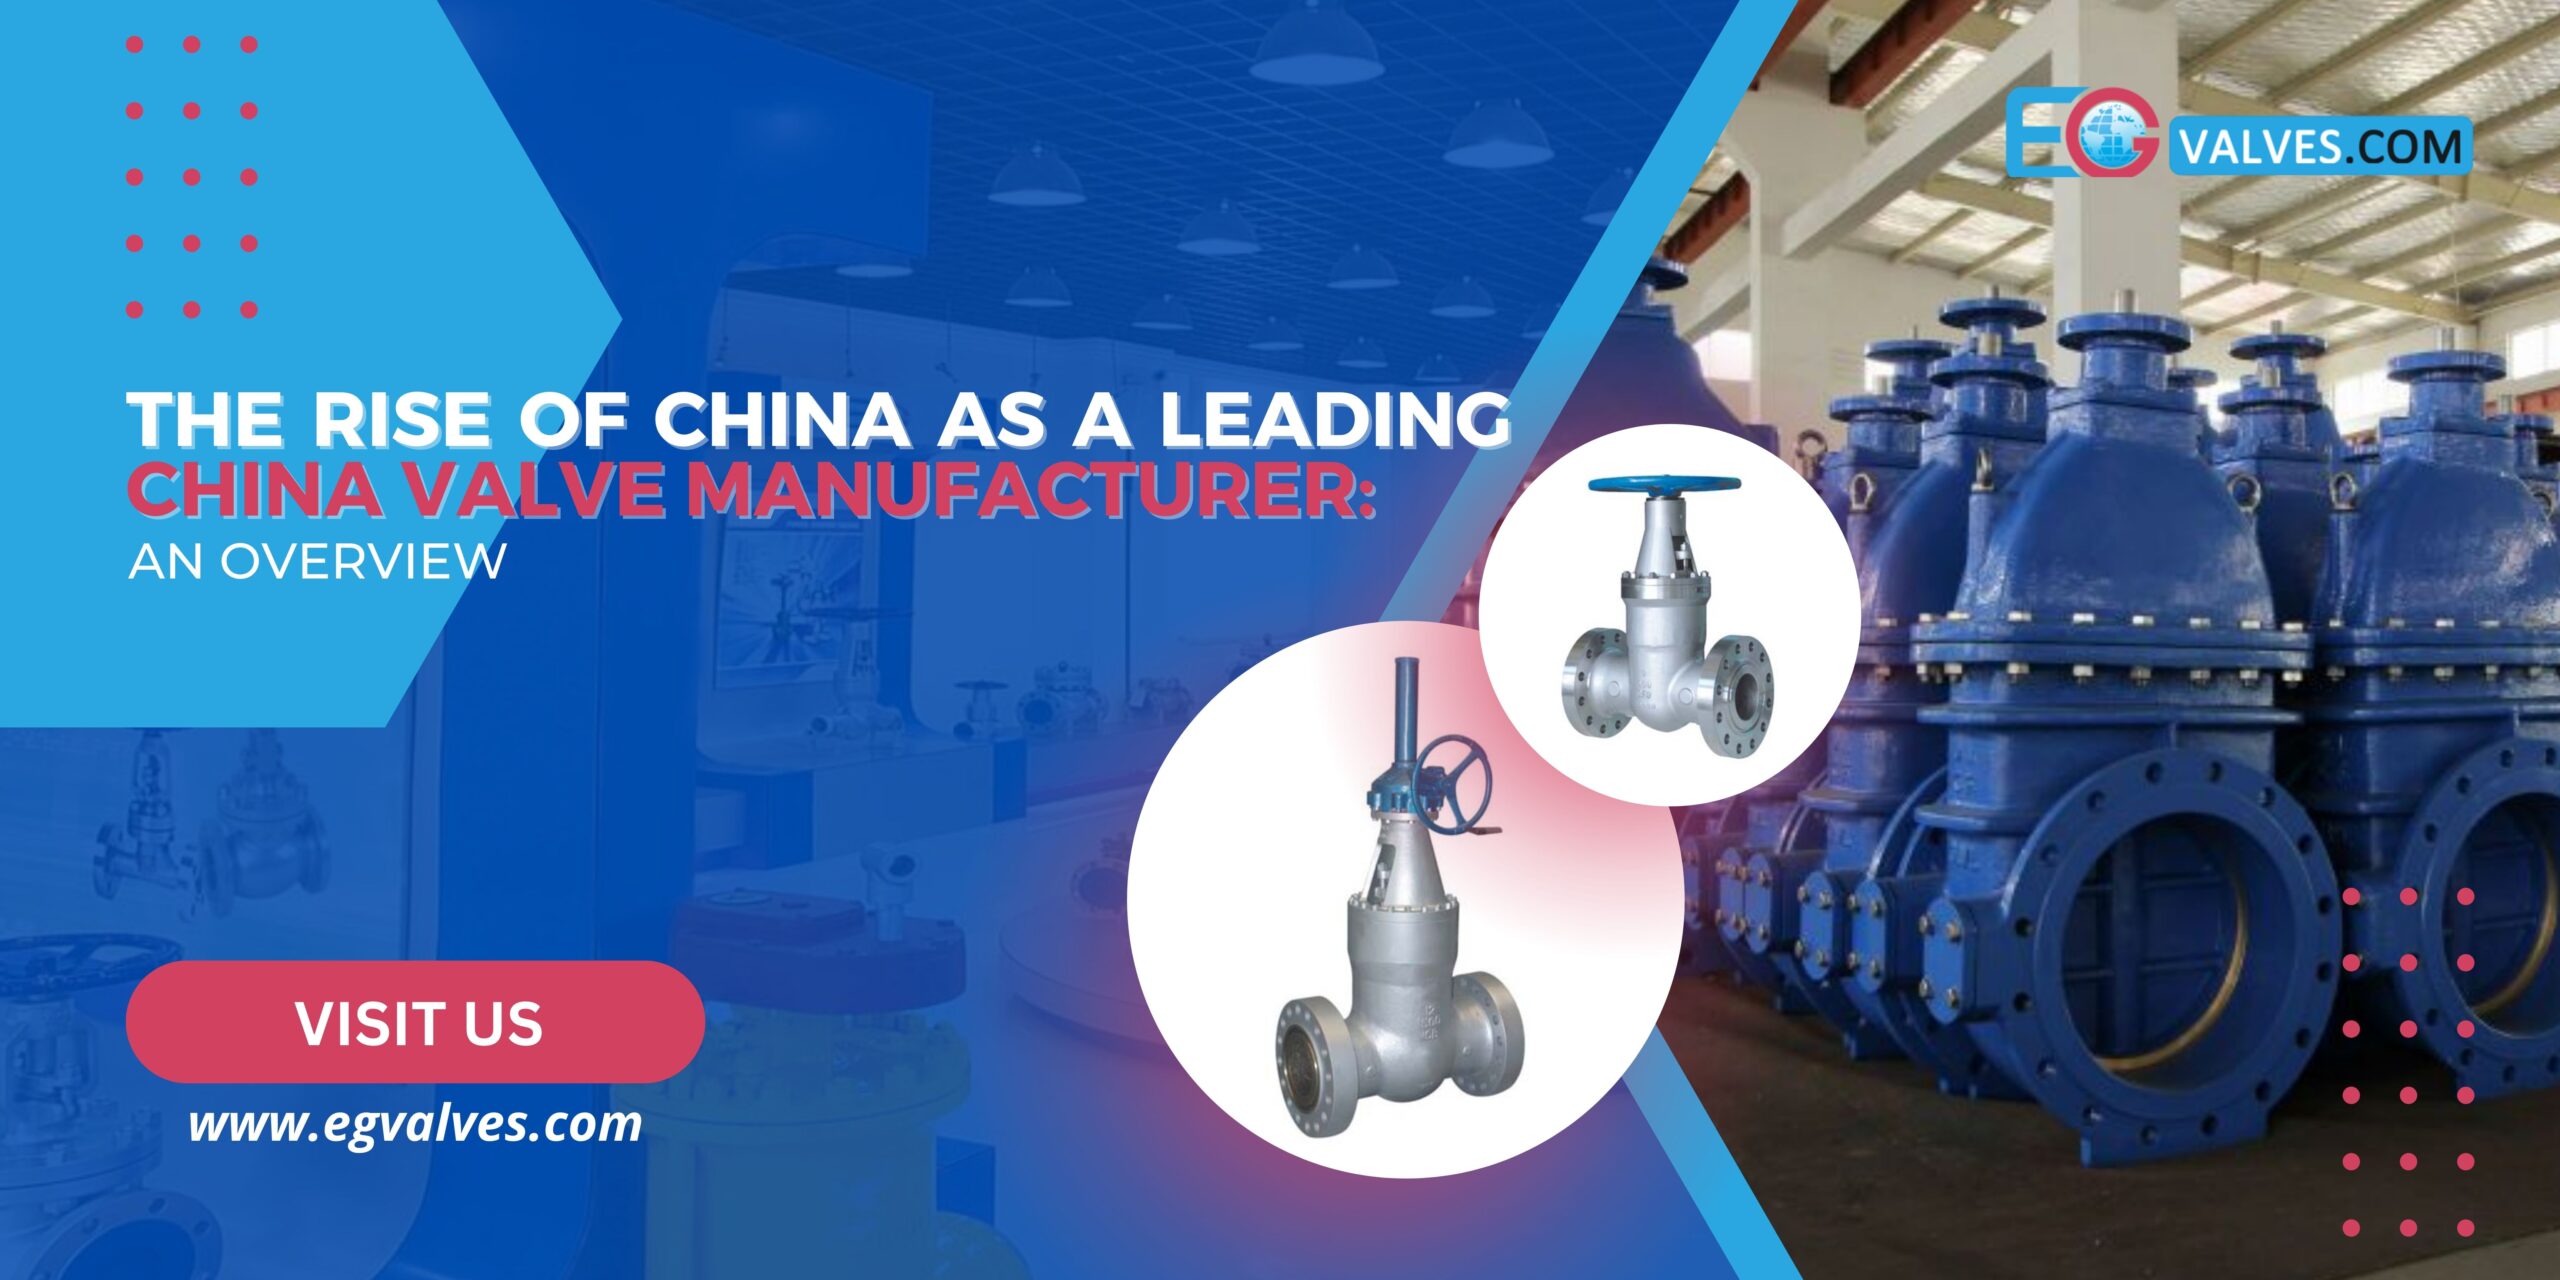 The Rise of China as a Leading China Valve Manufacturer An Overview